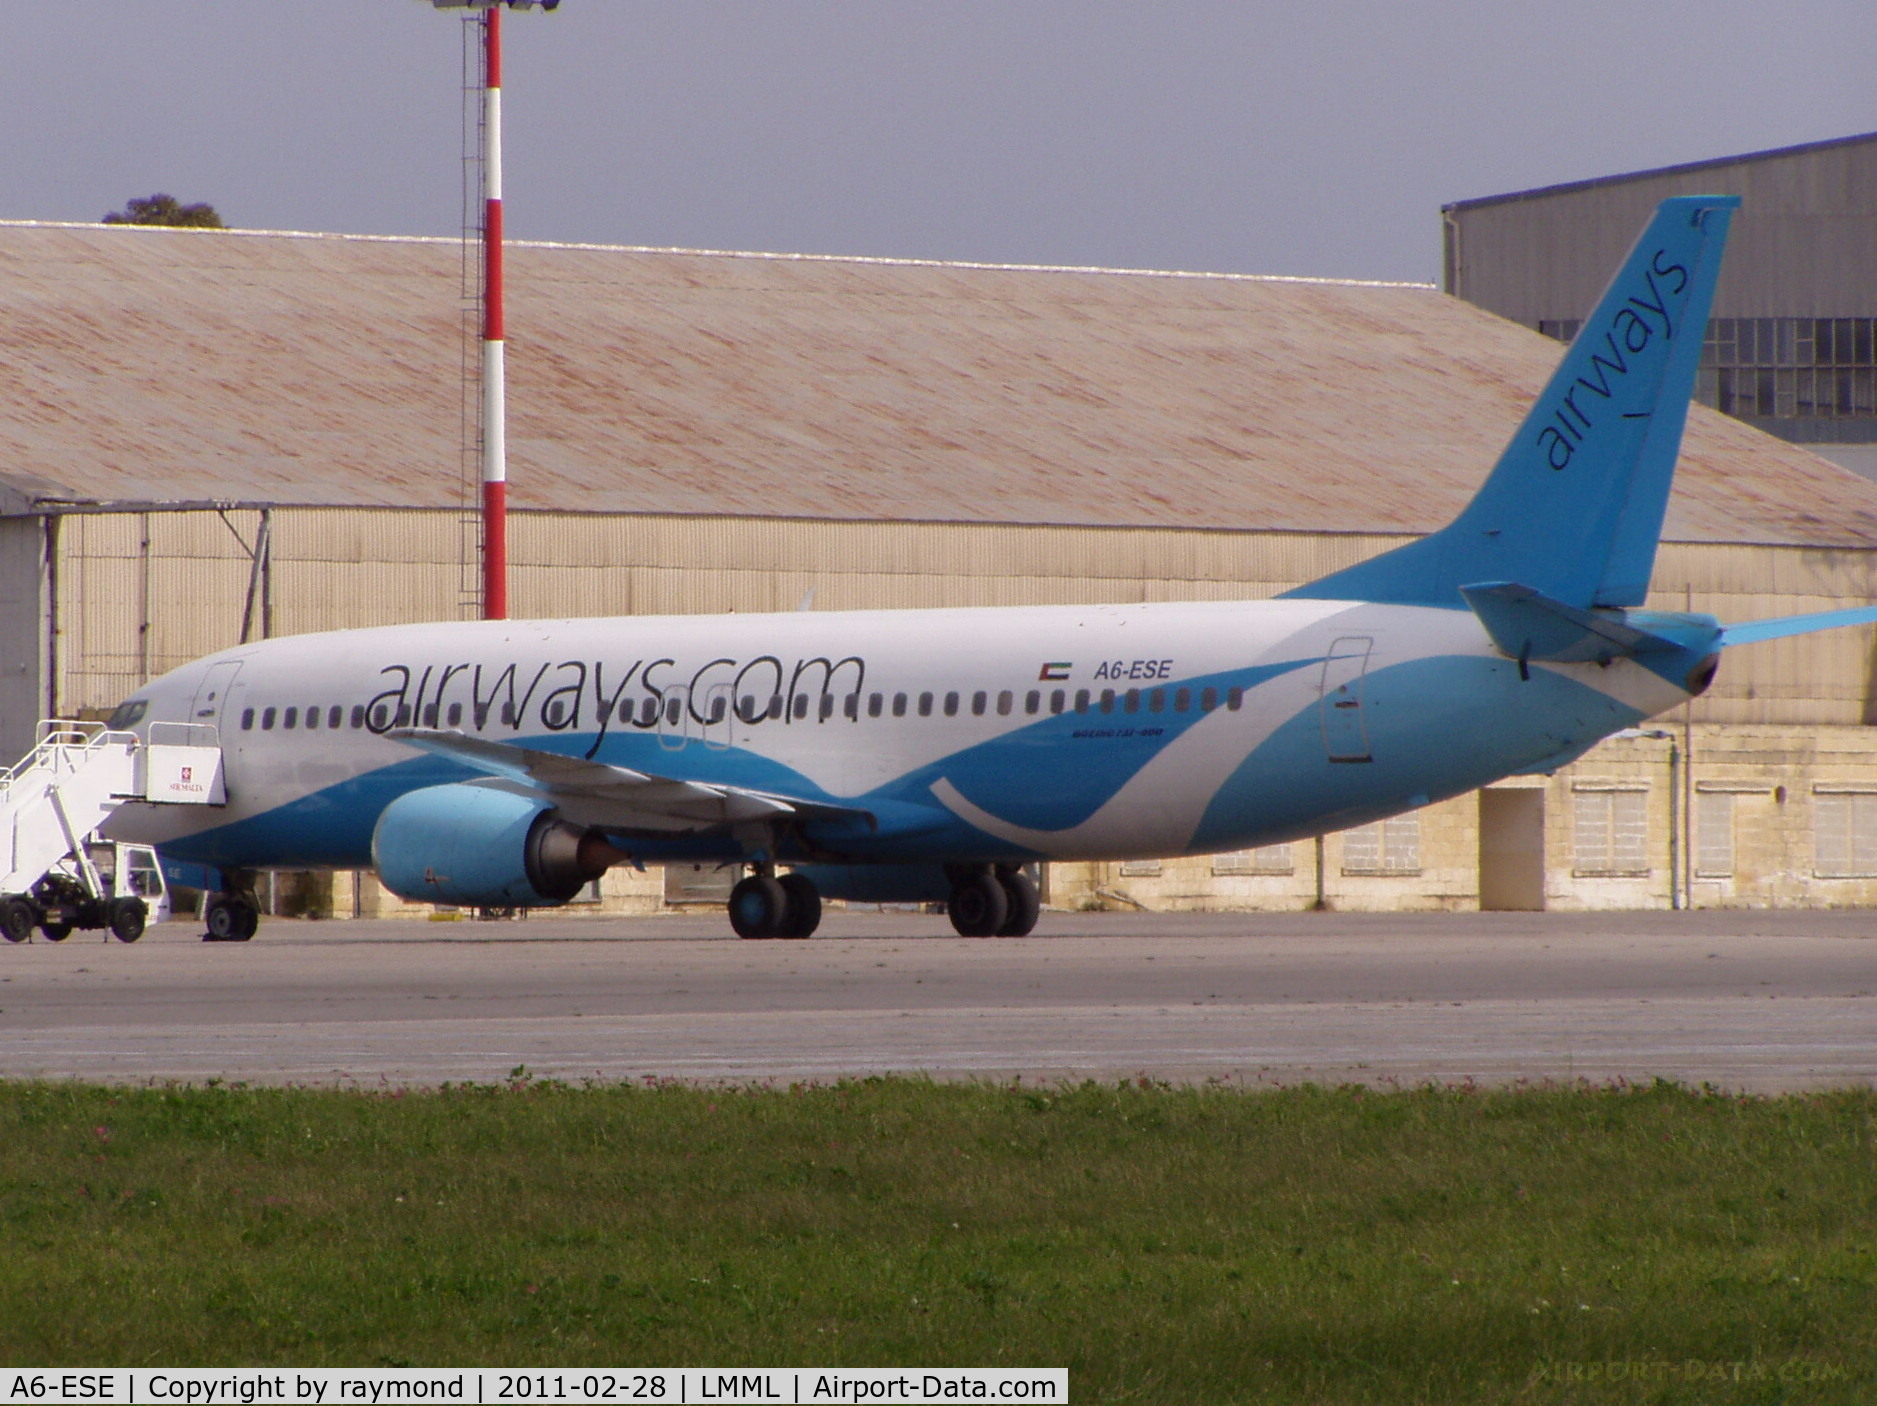 A6-ESE, 1994 Boeing 737-46J C/N 27213, B737 A6-ESE of RAK Airways seen parked in Malta during the Libyan conflict.